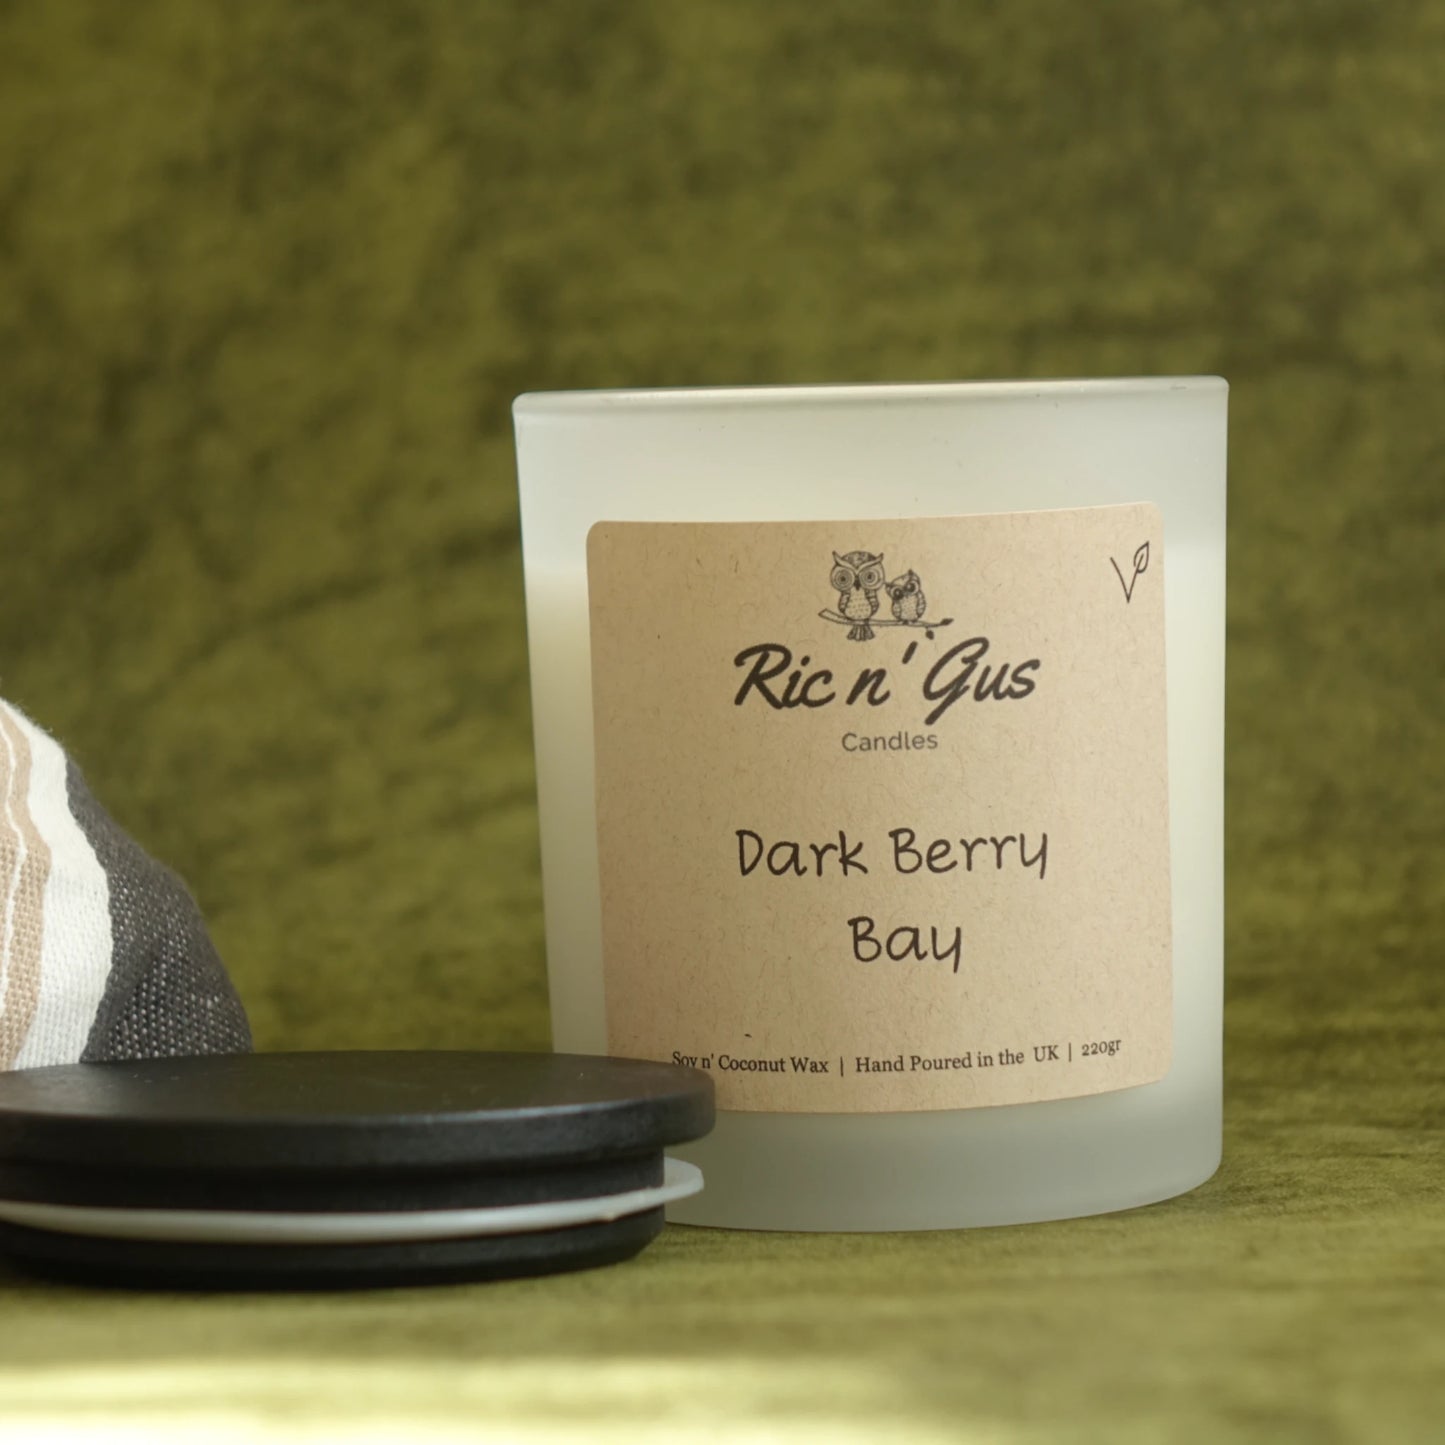 blackberry and bay scented candle ric n'gus candles coconut soy wax (4)